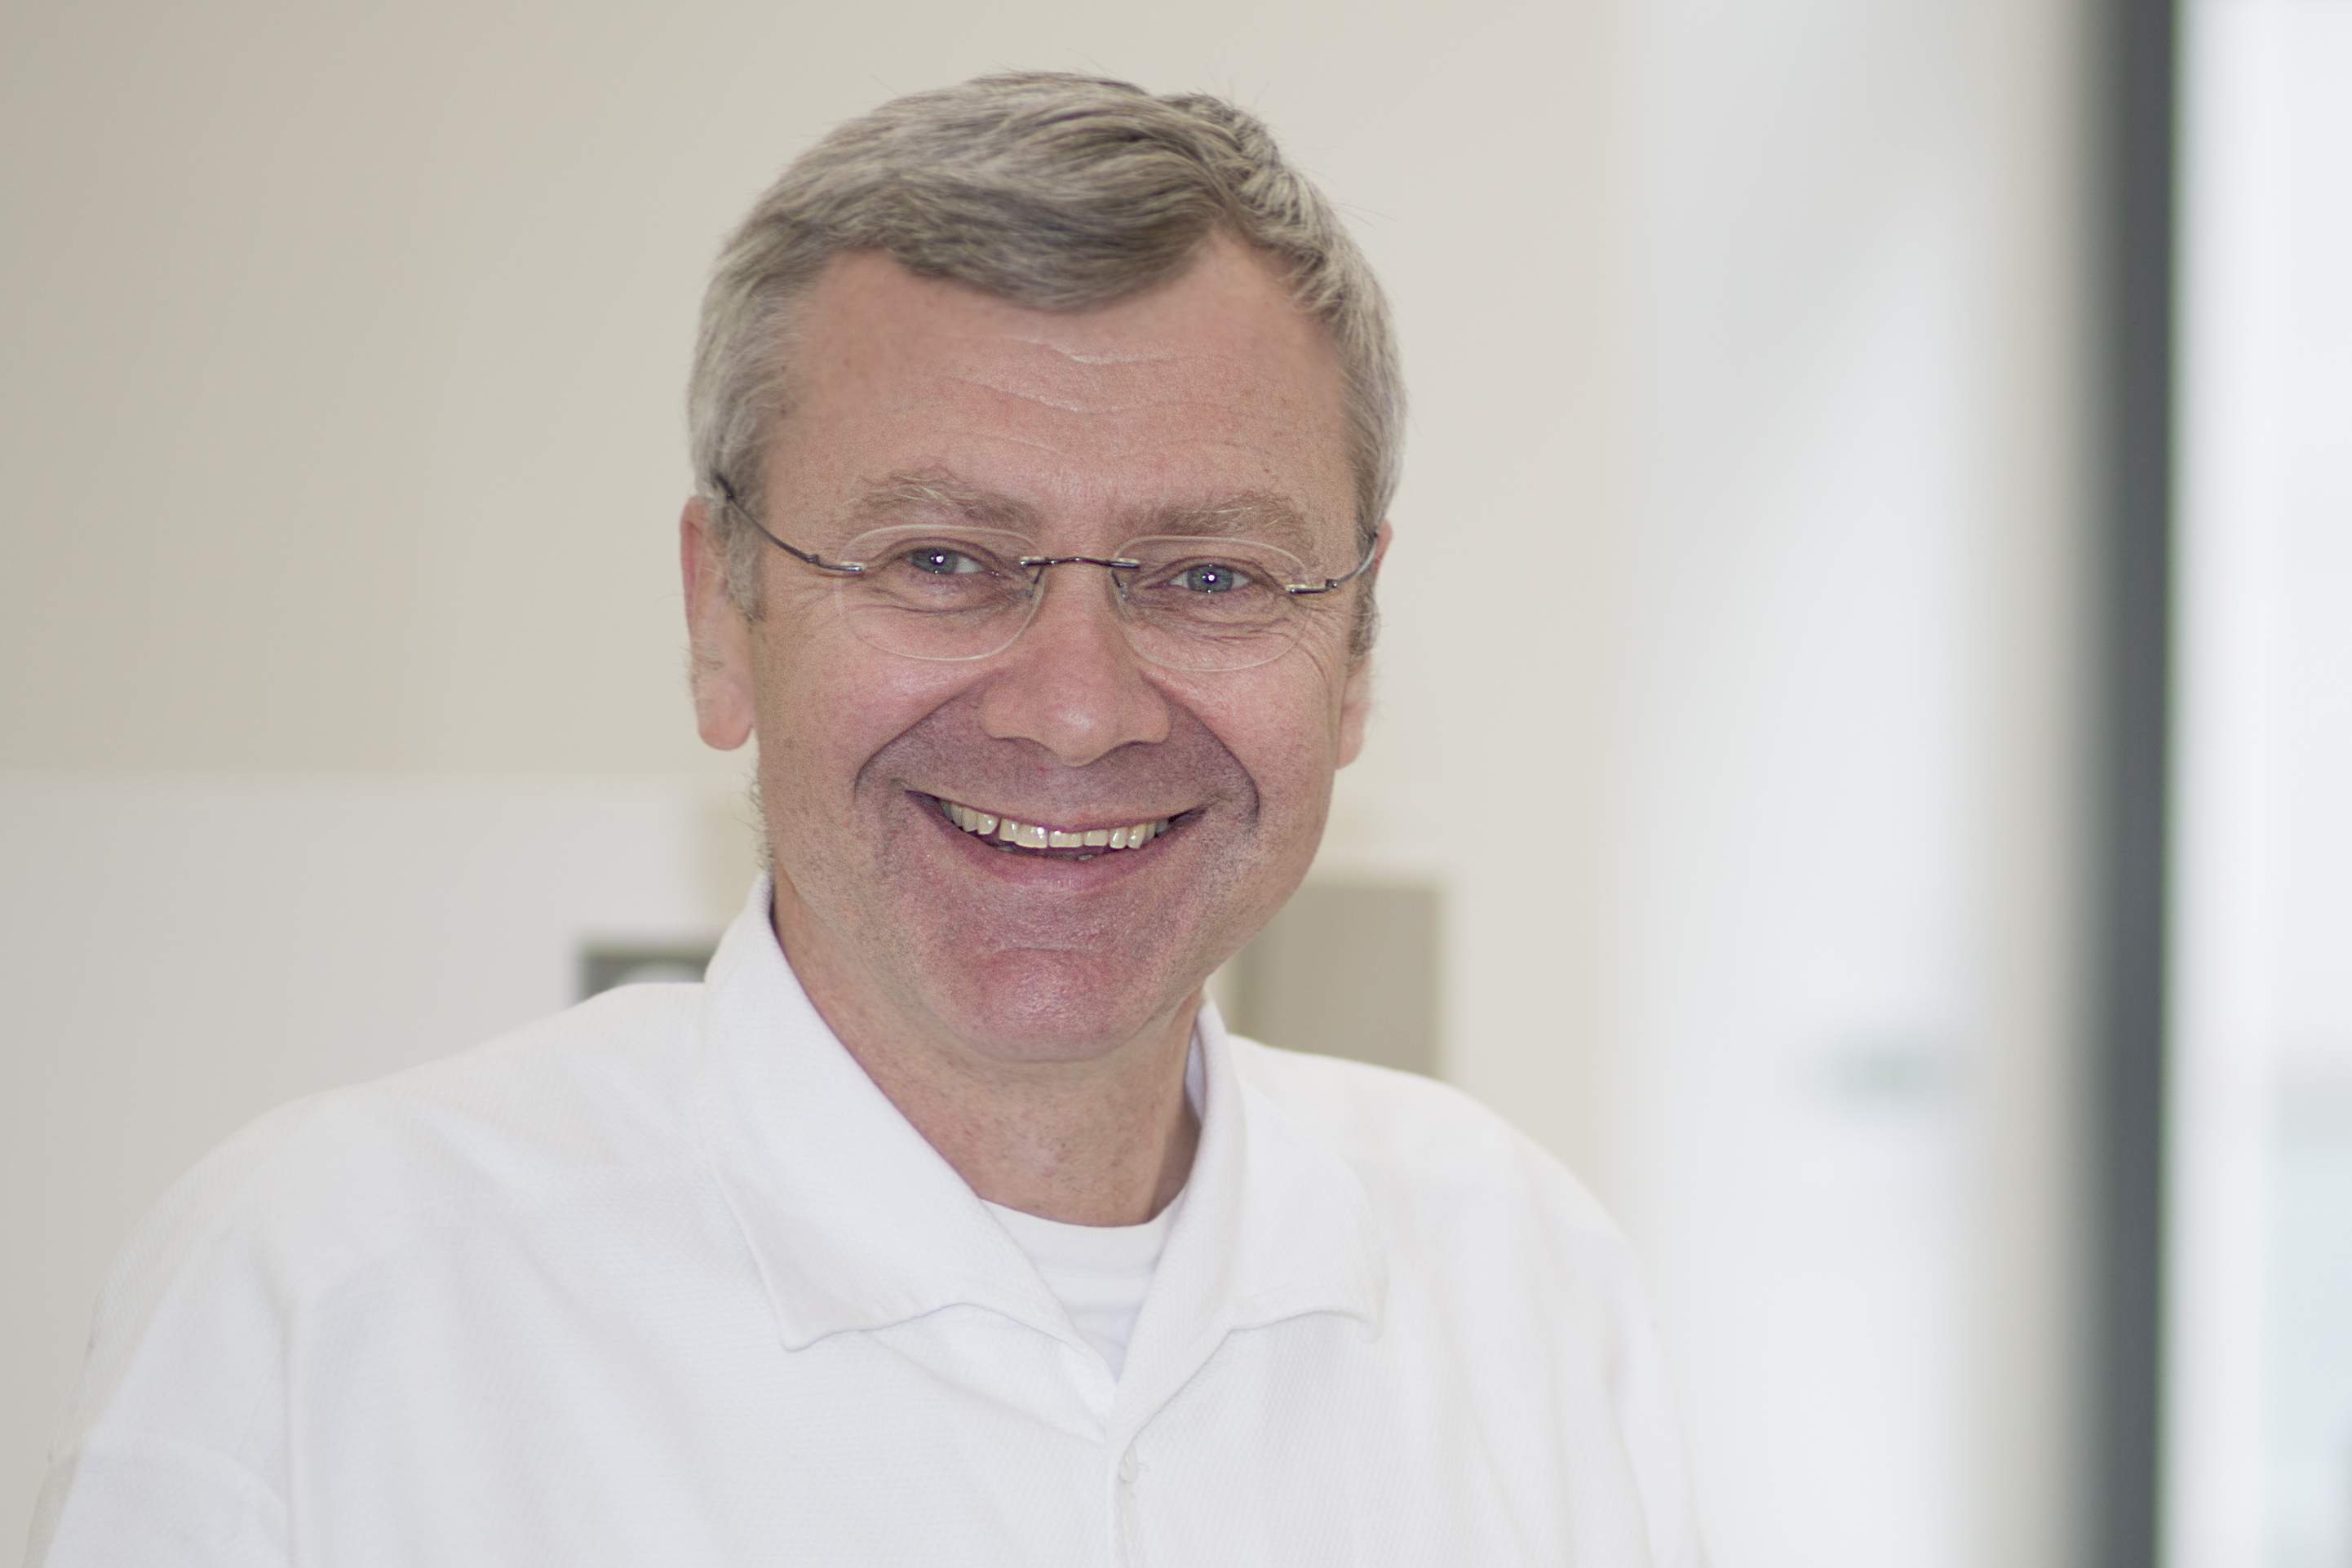 Ao.Univ. Prof. DDr Christian Ulm, Head of the Special Clinic for Implantology